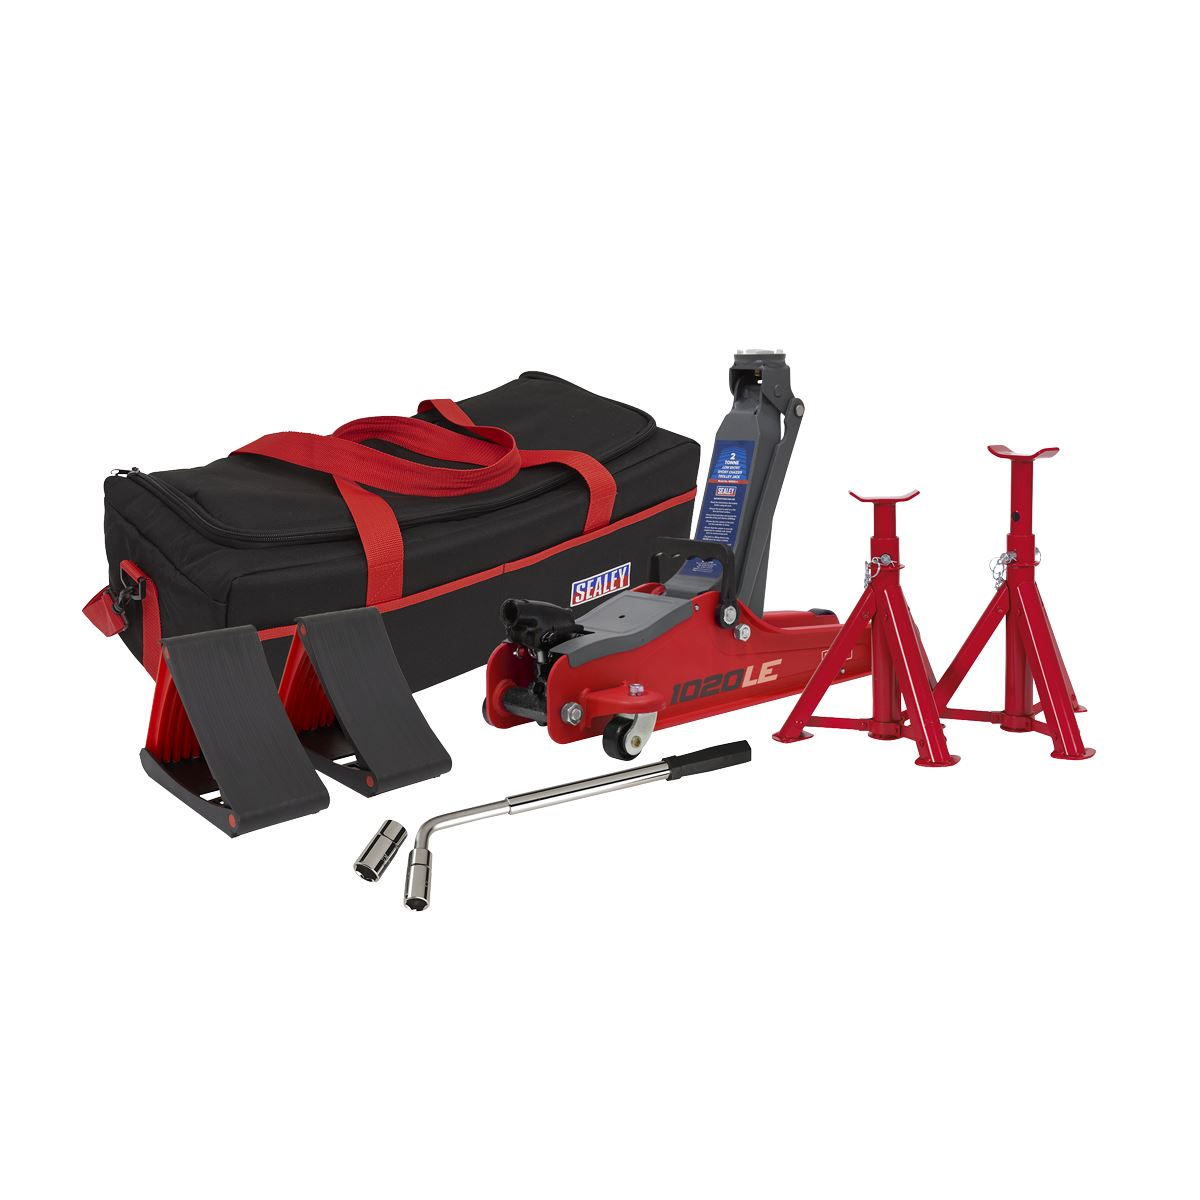 Sealey Low Entry Short Chassis Trolley Jack & Accessories Bag Combo, 2 Tonne - Red